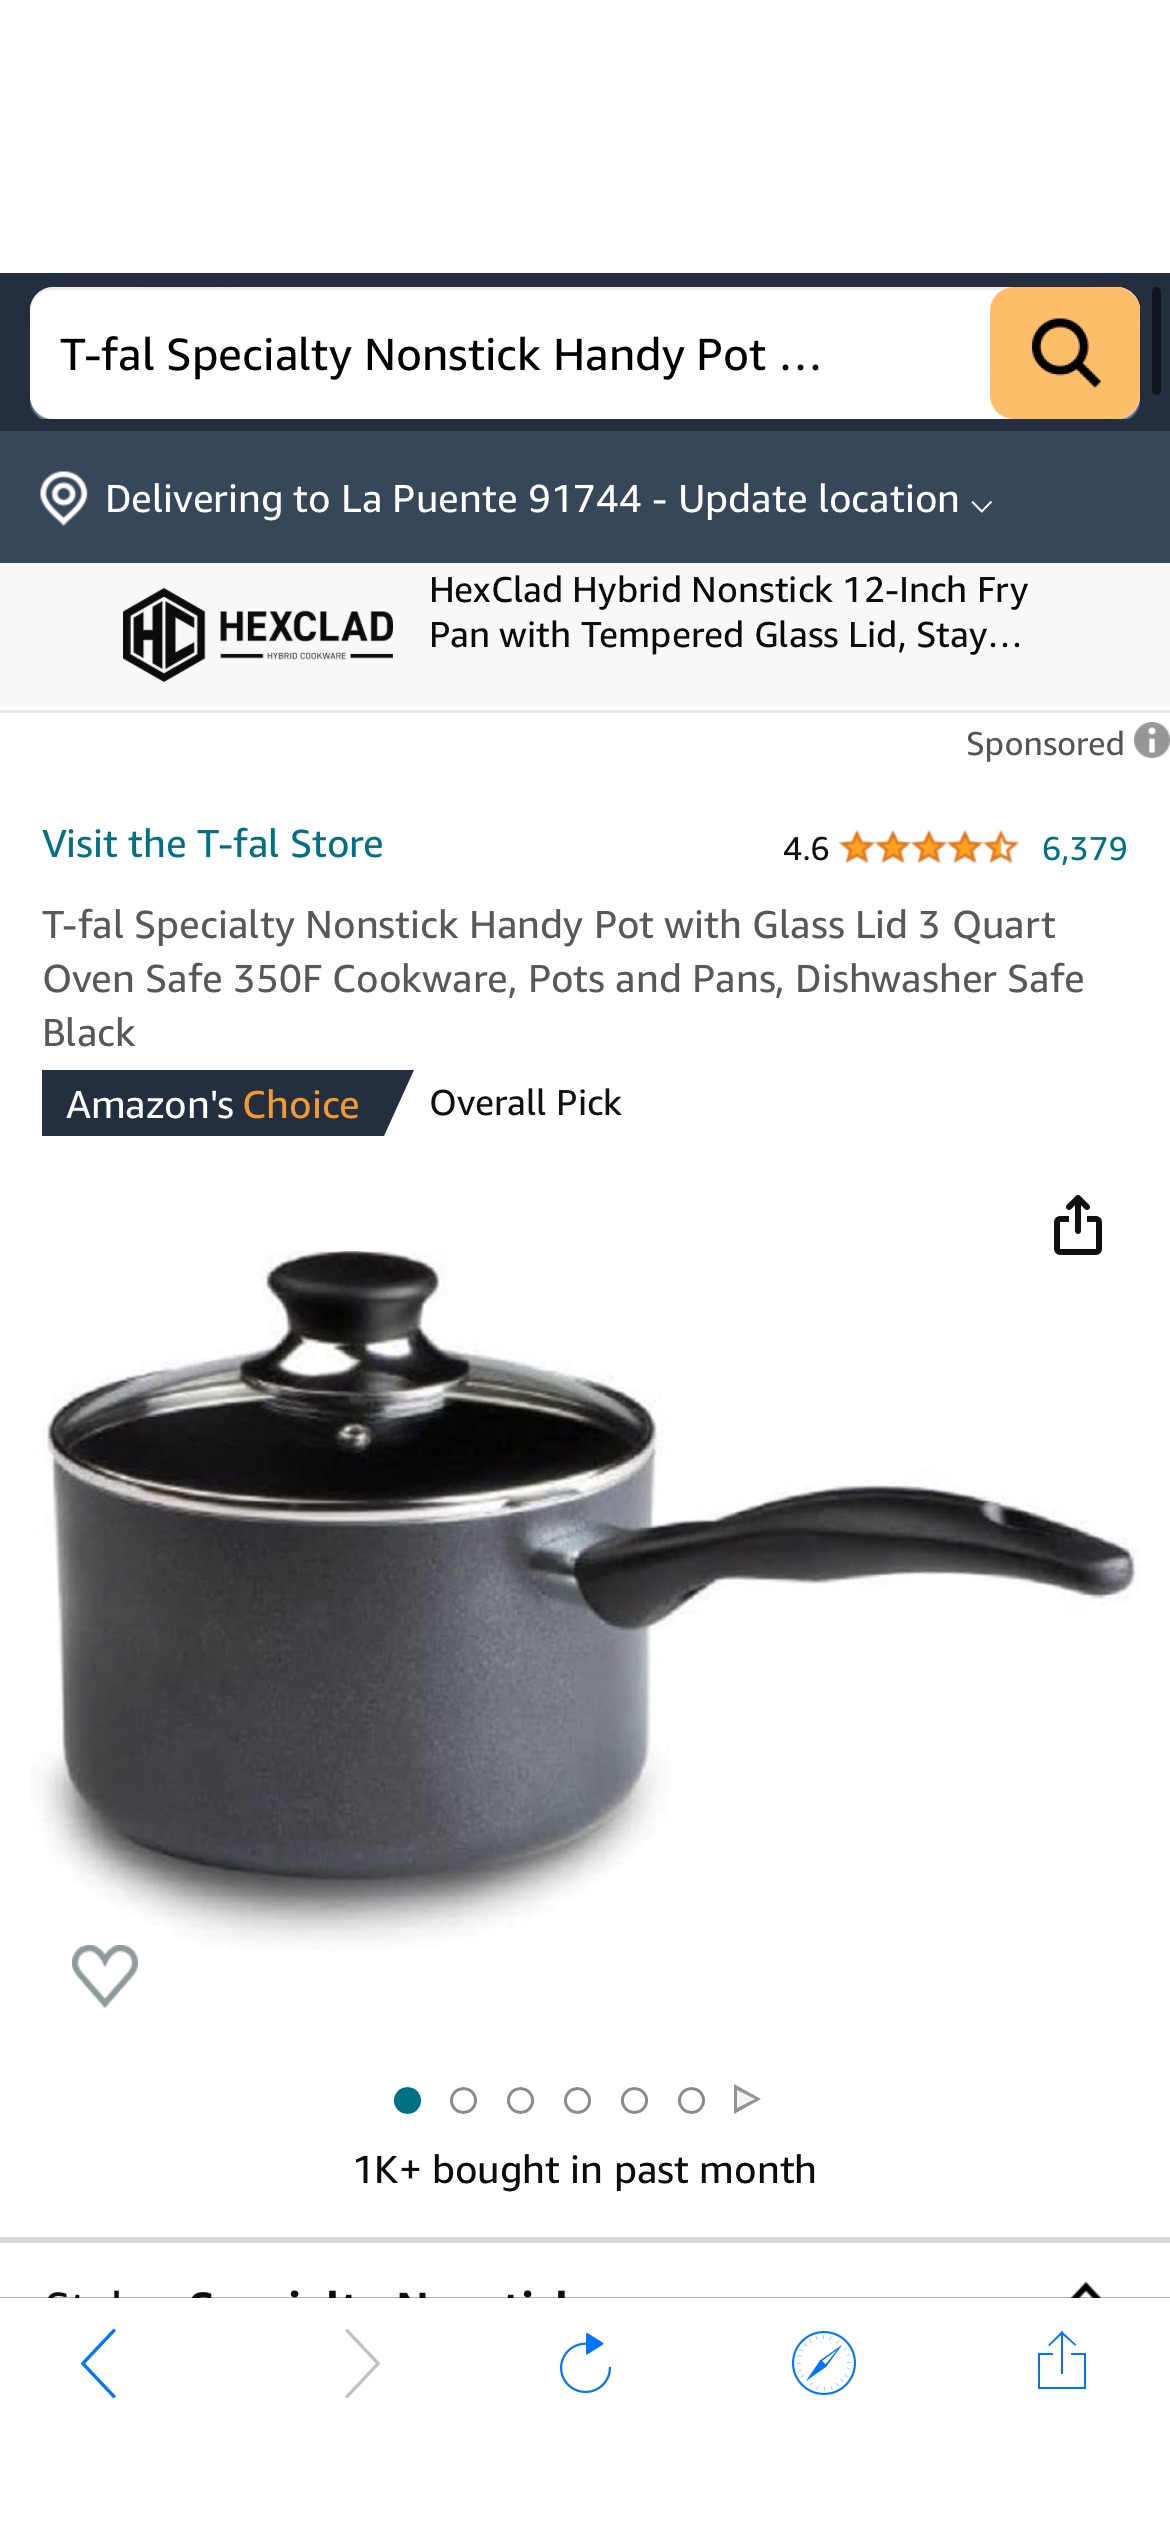 Amazon.com: T-fal Specialty Nonstick Handy Pot with Glass Lid 3 Quart Oven Safe 350F Cookware, Pots and Pans, Dishwasher Safe Black: Saucepans: Home & Kitchen